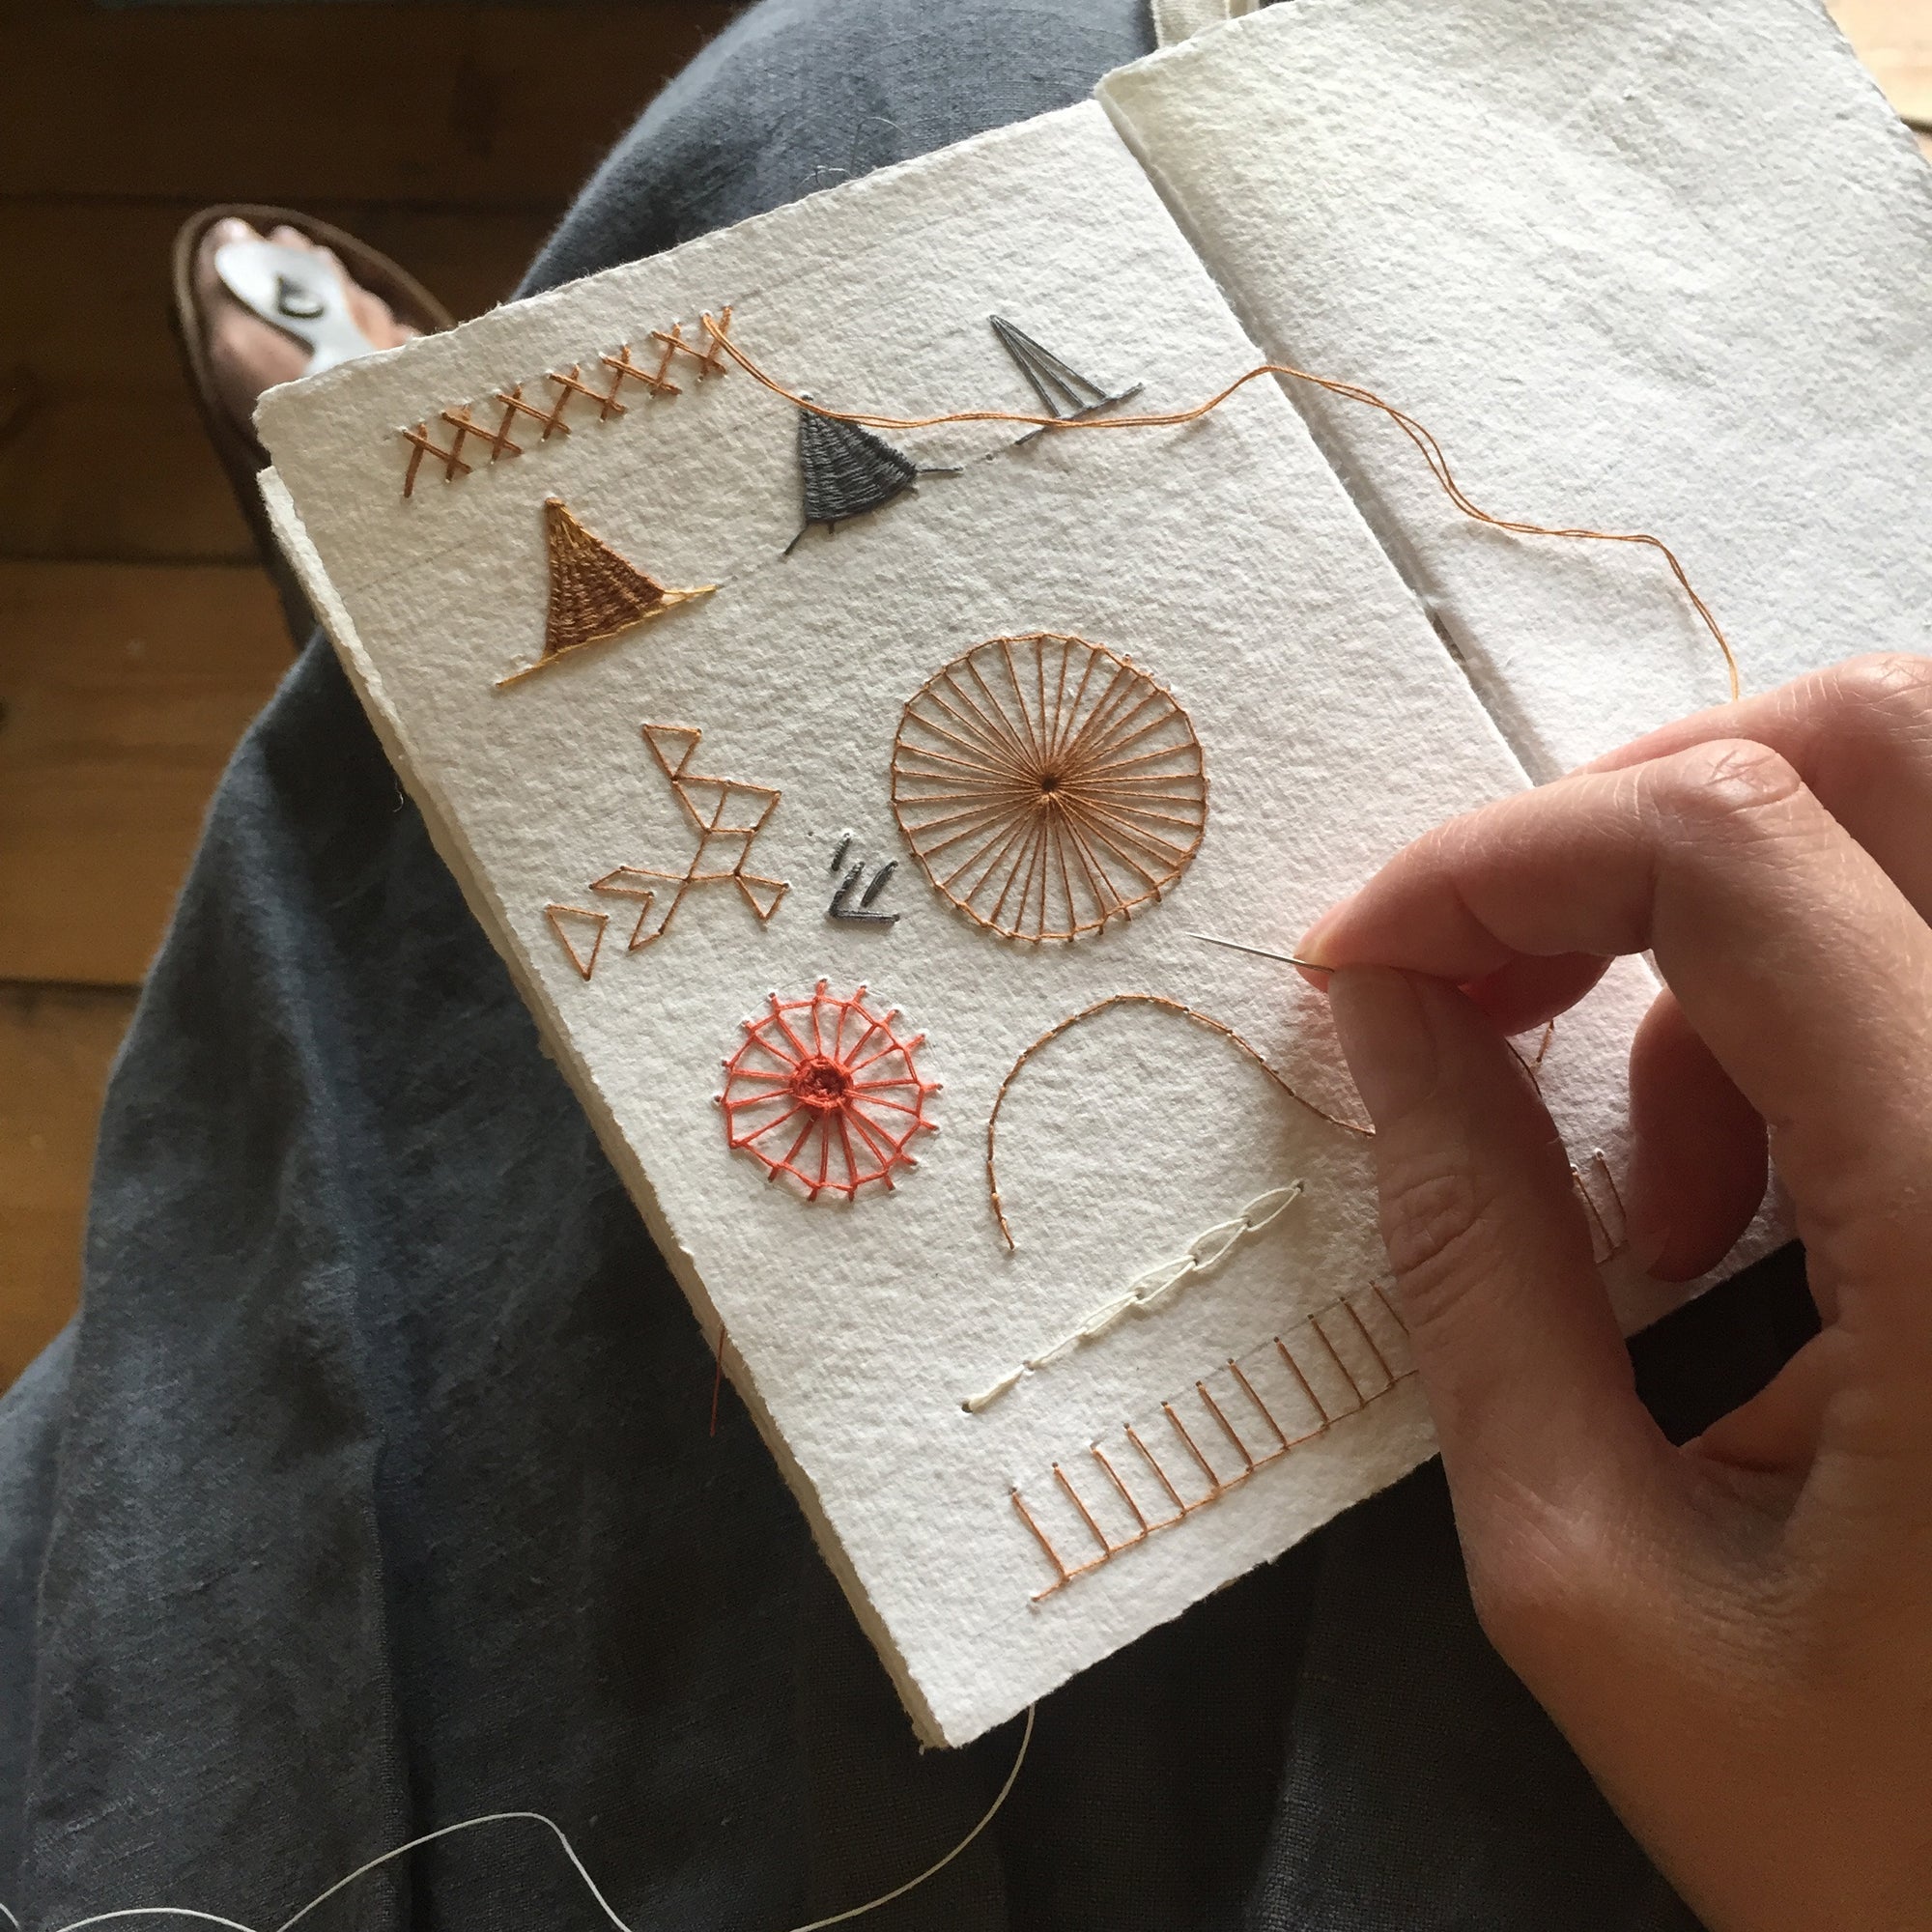 Cotton Rag Artist's Sketchbook can be used for embroidery